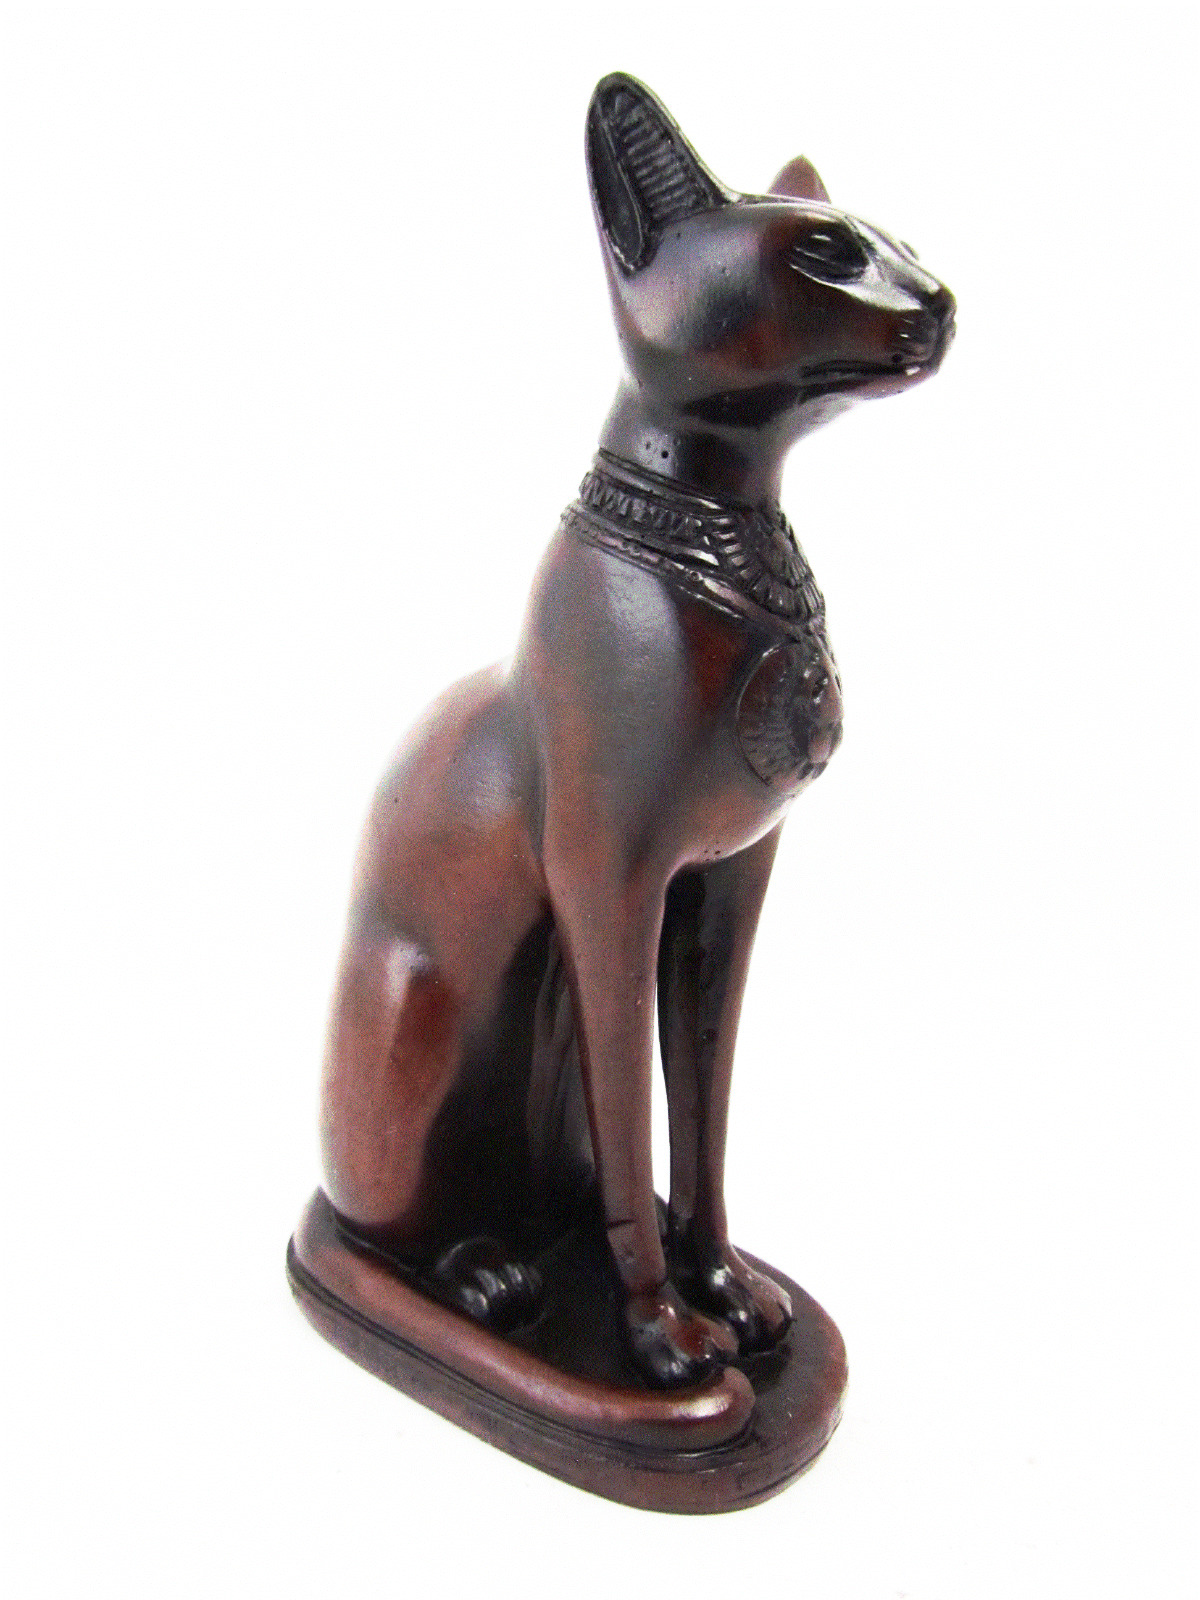 Egyptian Bastet Cat Statue Ancient Egypt Figurine Paperweight for Desk Decor 5\